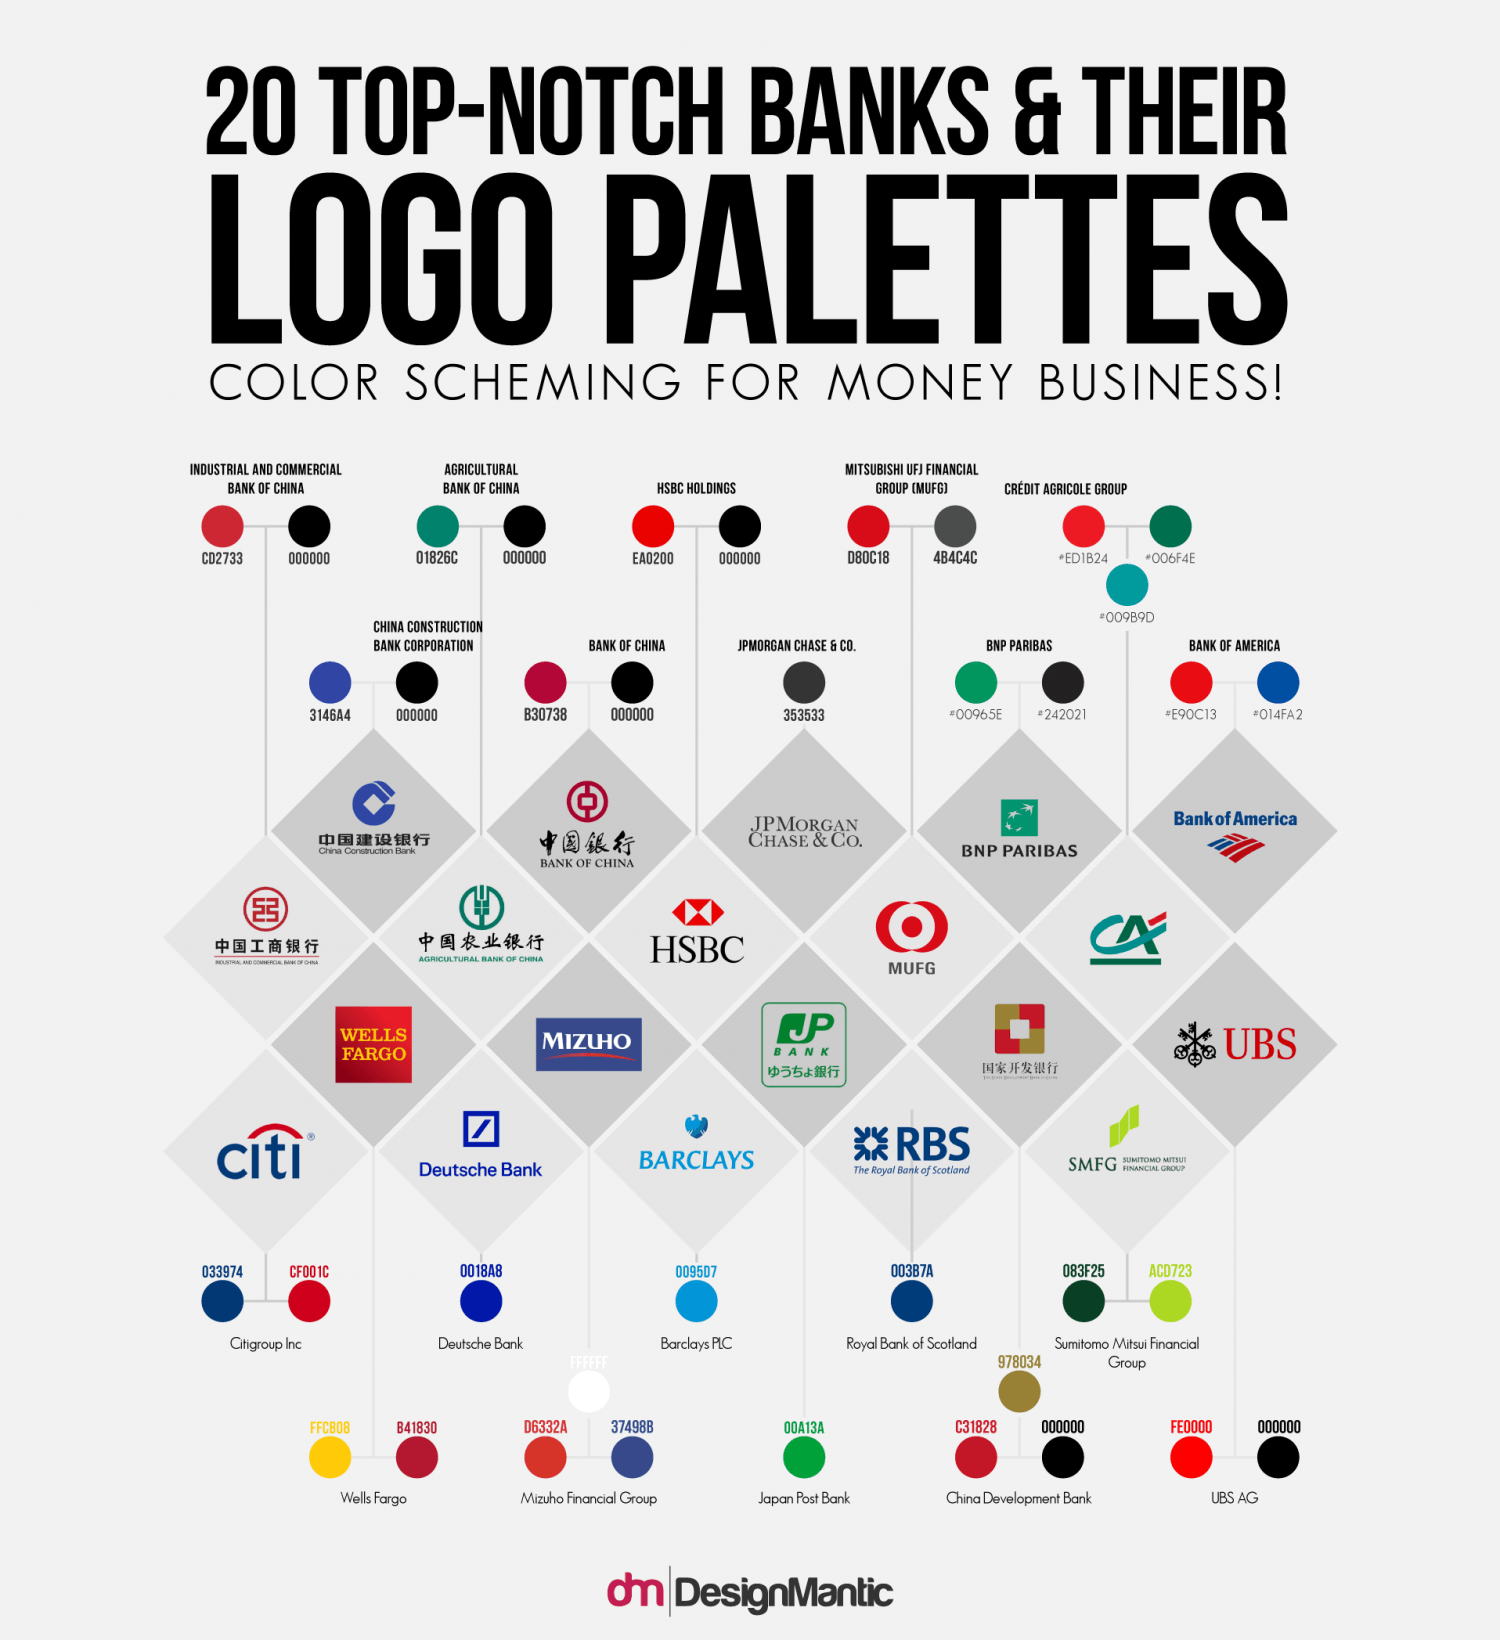 Banks Logo - 20 Top-Notch Banks And Their Logo Palettes | Visual.ly